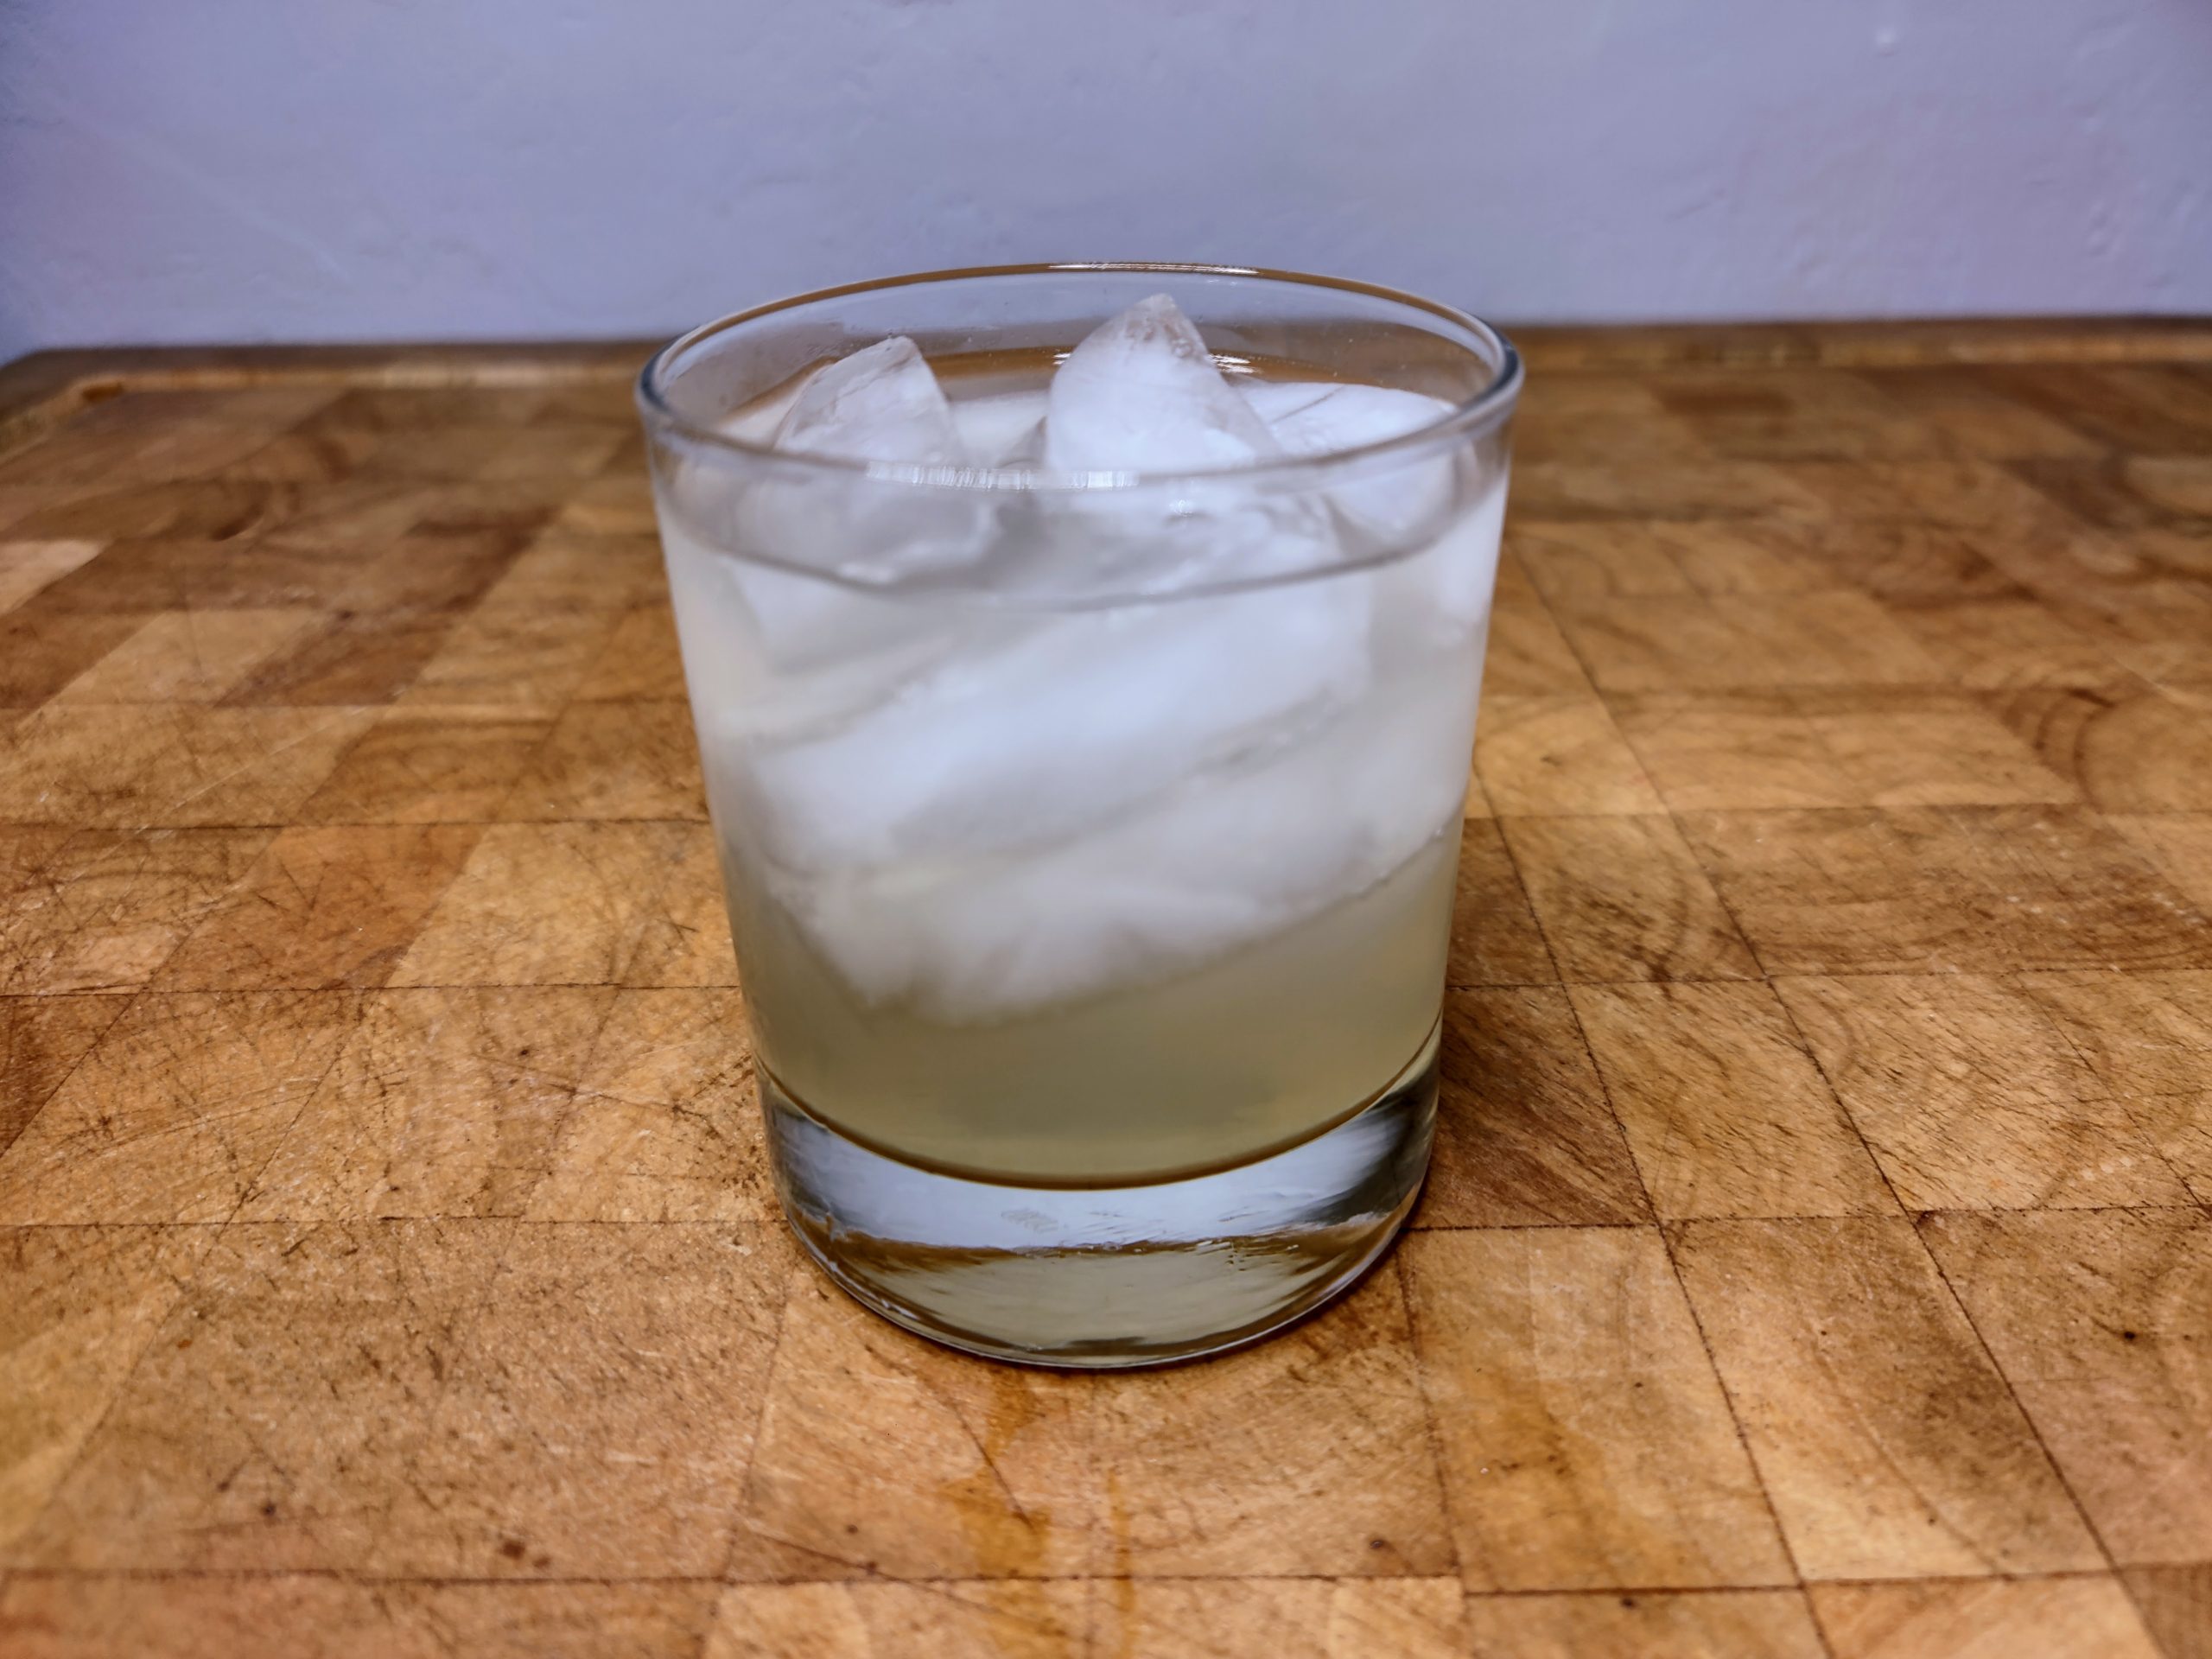 Foghorn drink in a rocks glass on a wooden table.